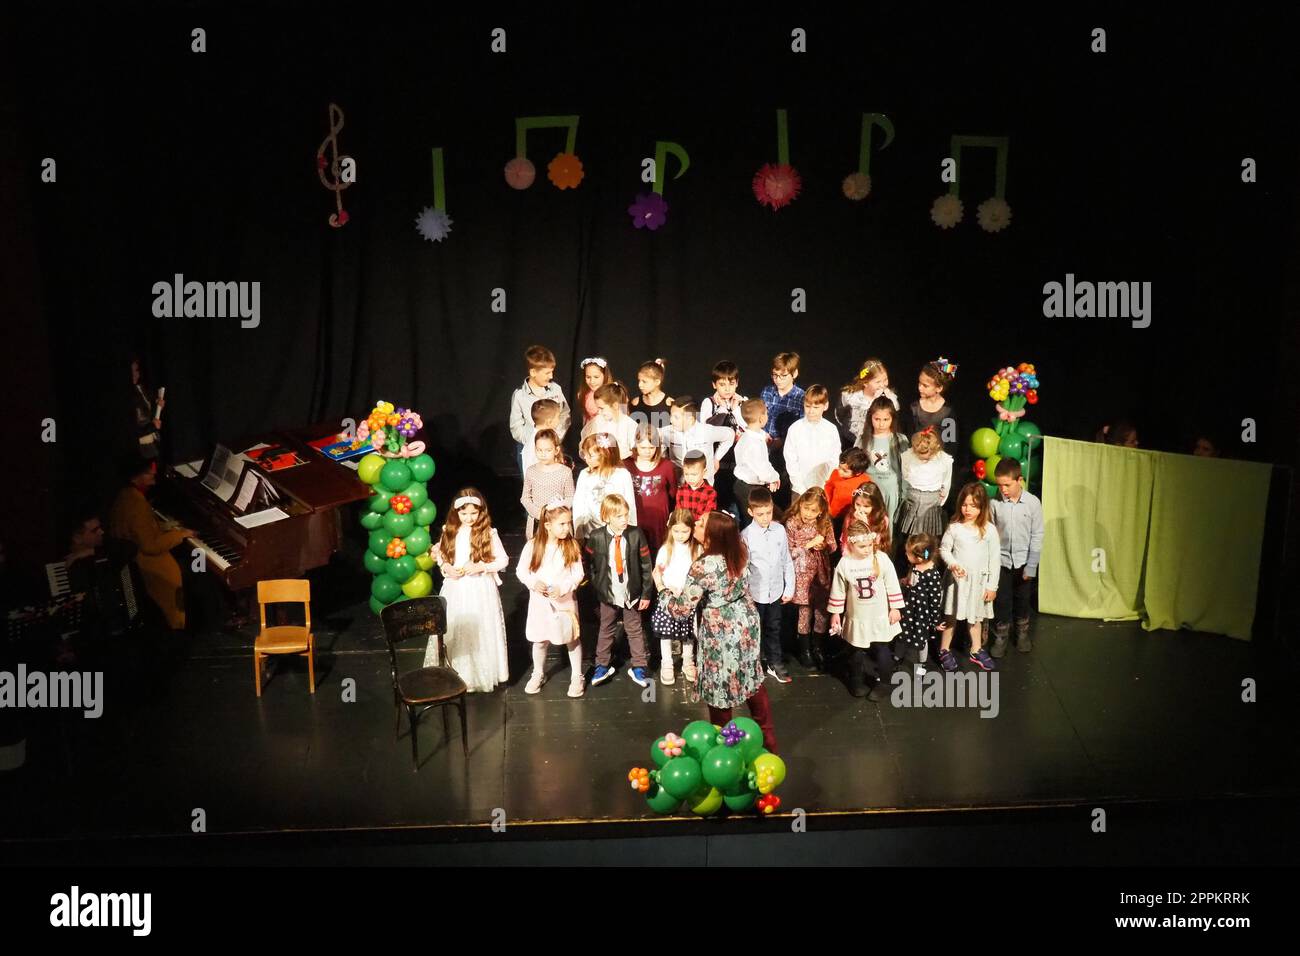 Sremska Mitrovica, Serbia March 8, 2022 Children's choir performance on stage. Children sing. Musical children's group in elegant costumes perform holiday songs for mothers. Dark scene. Stock Photo